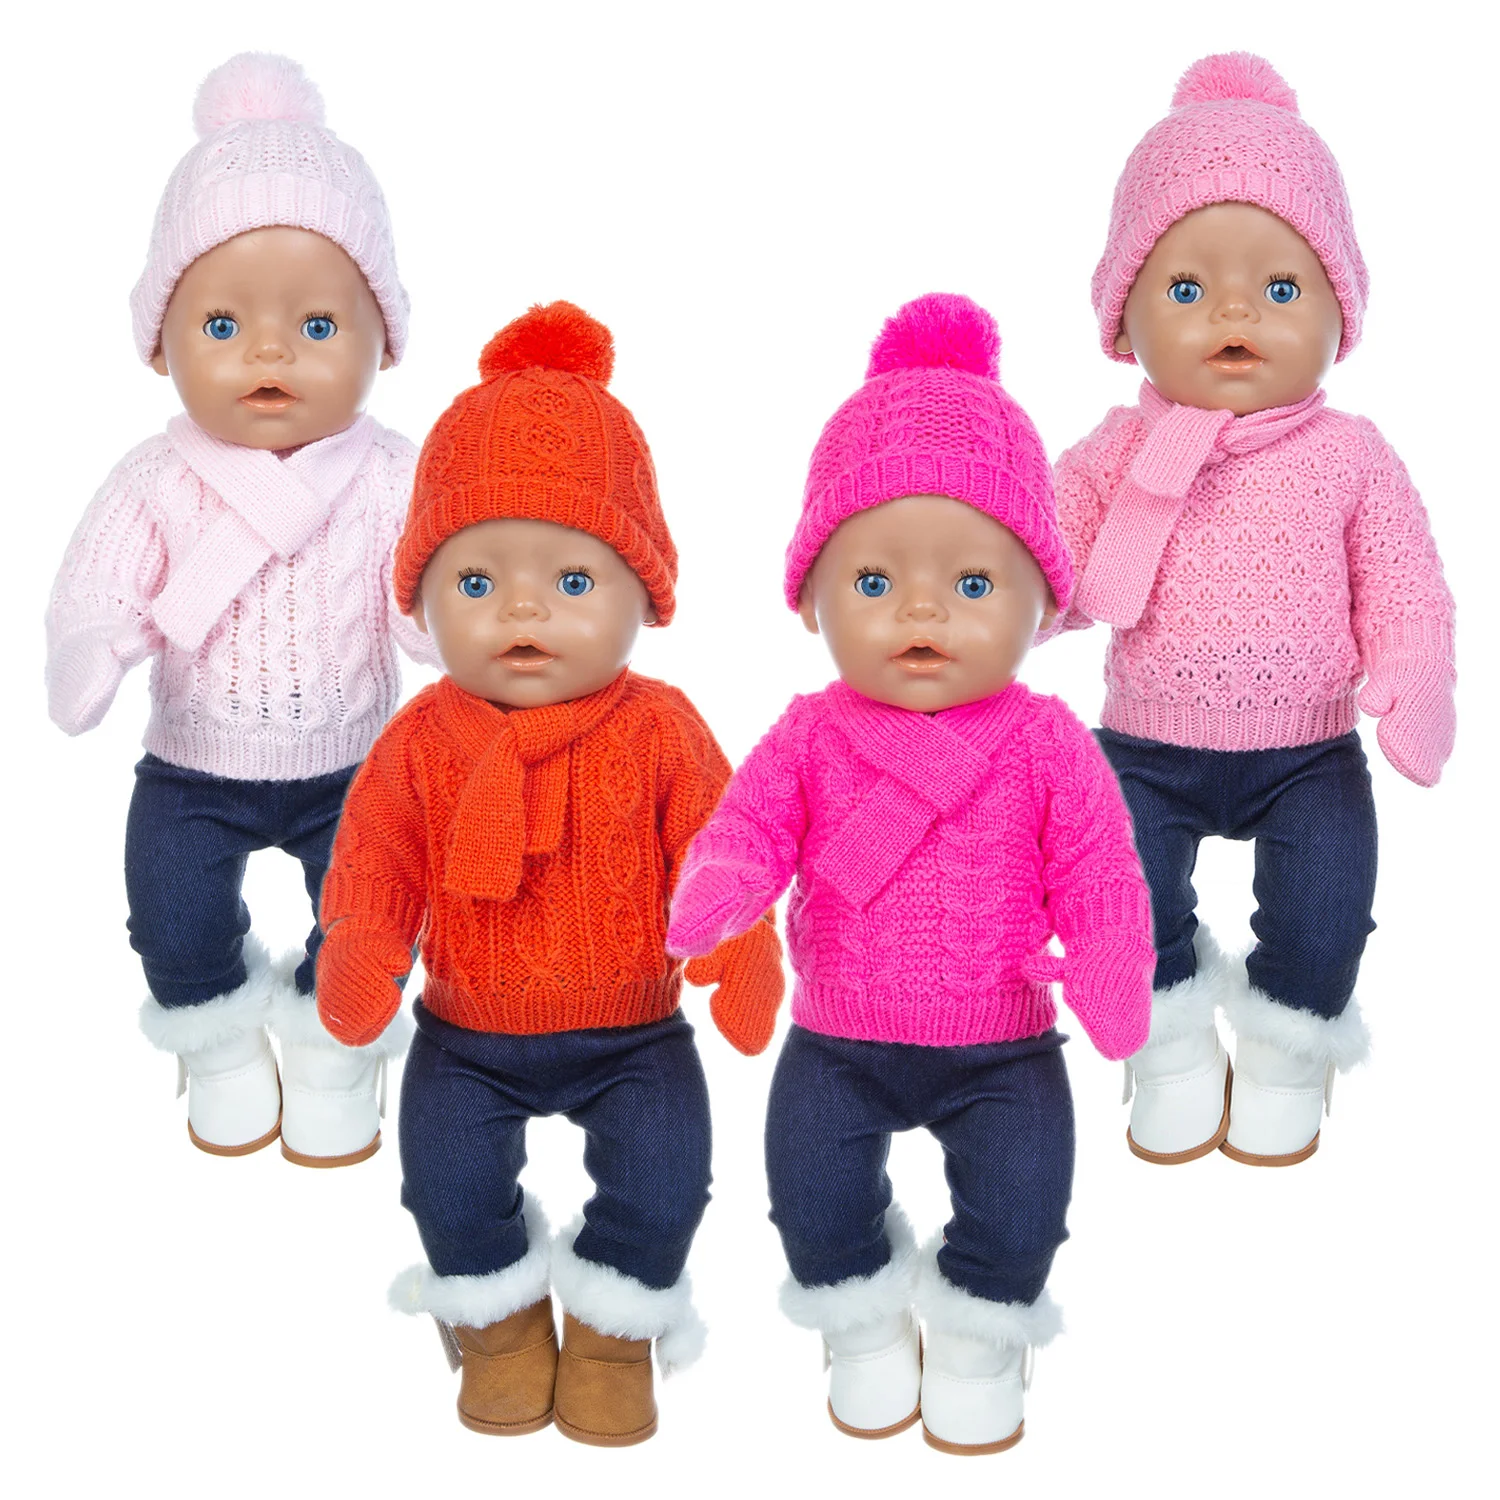 

2023 New Christmas Sweater Set Fit For 43cm Baby Doll 17 Inch Reborn Baby Doll Clothes, Shoes are not included